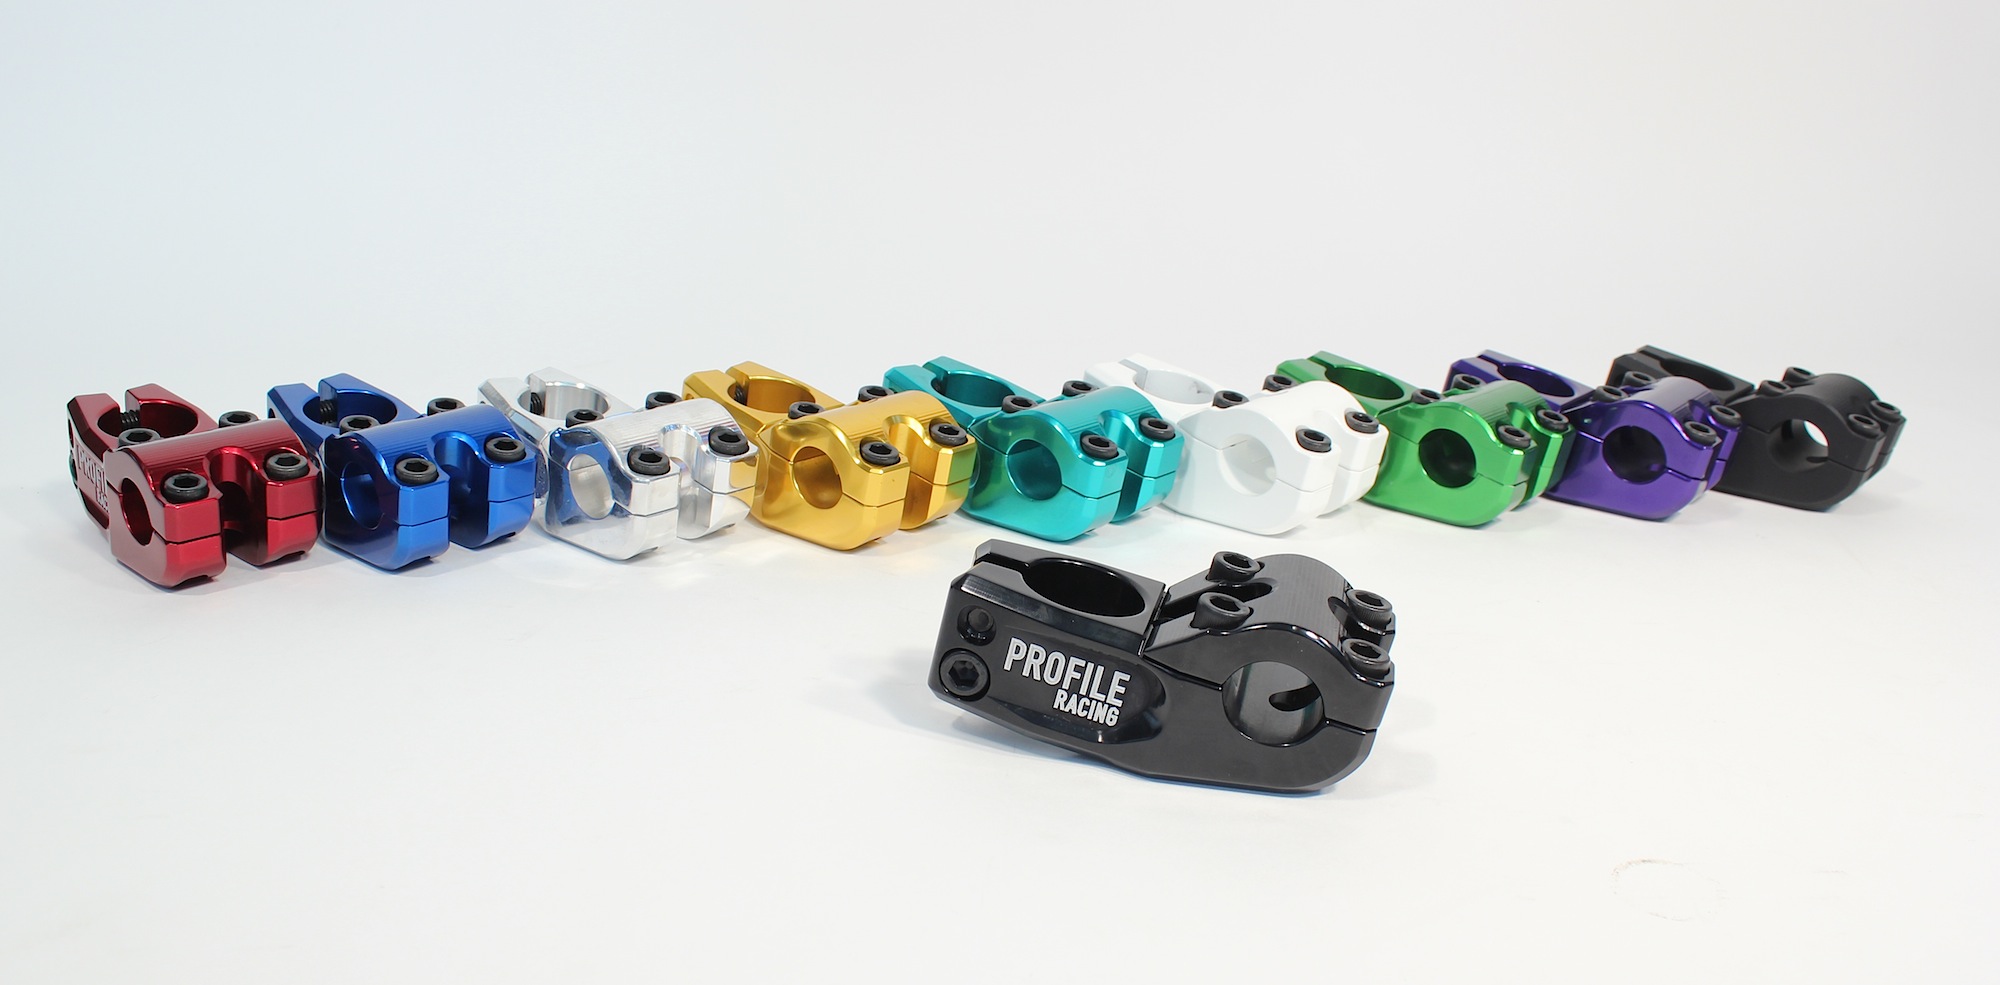 The complete stock of the Iconic Profile Push Stem.